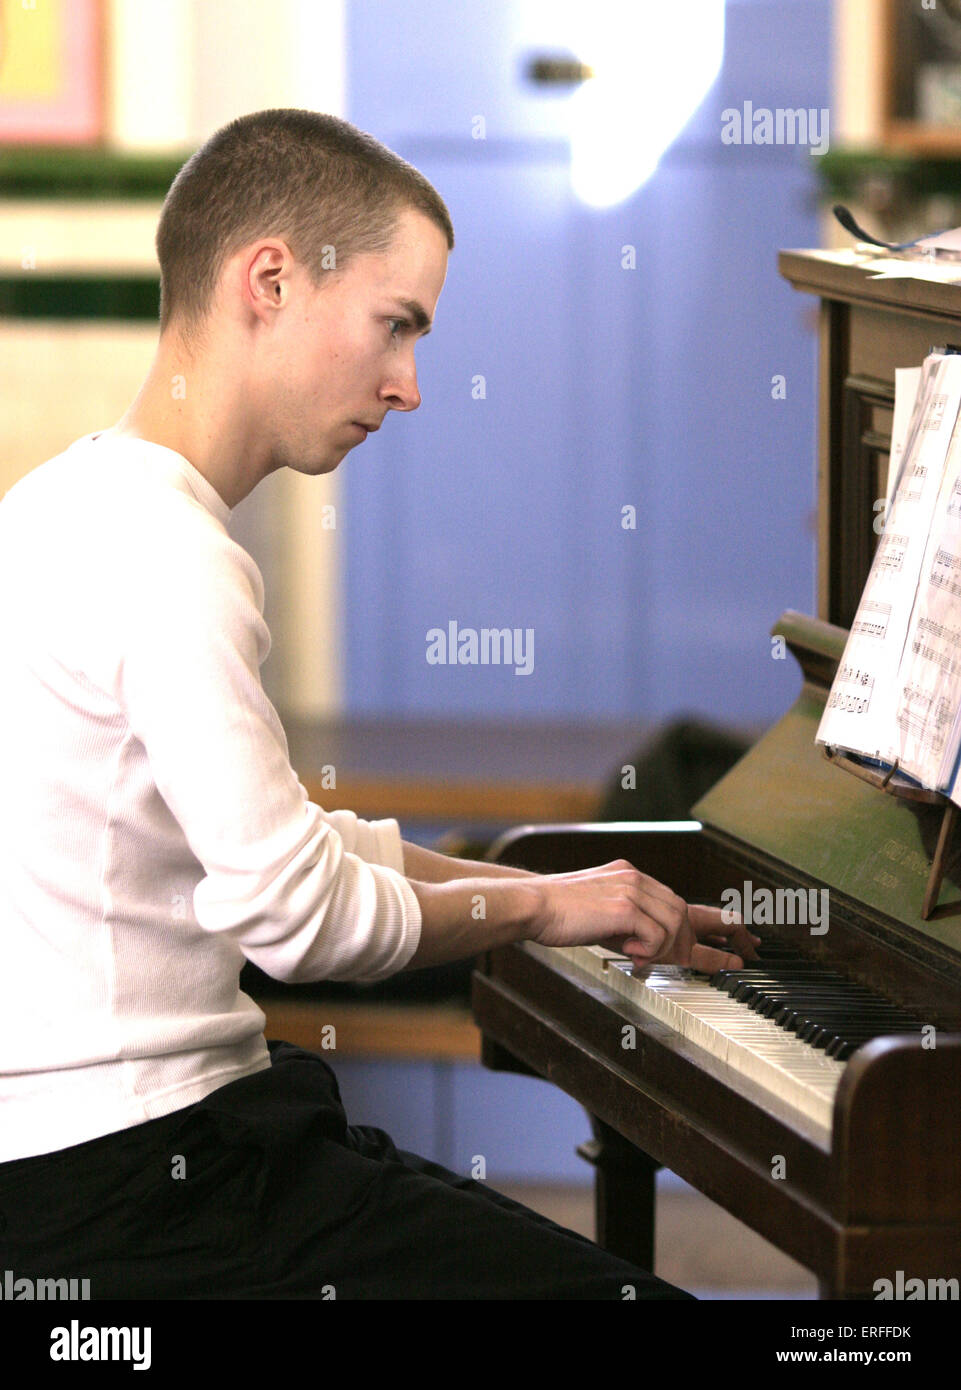 Young pianist Dan Perkins playing on upright piano with score. Stock Photo